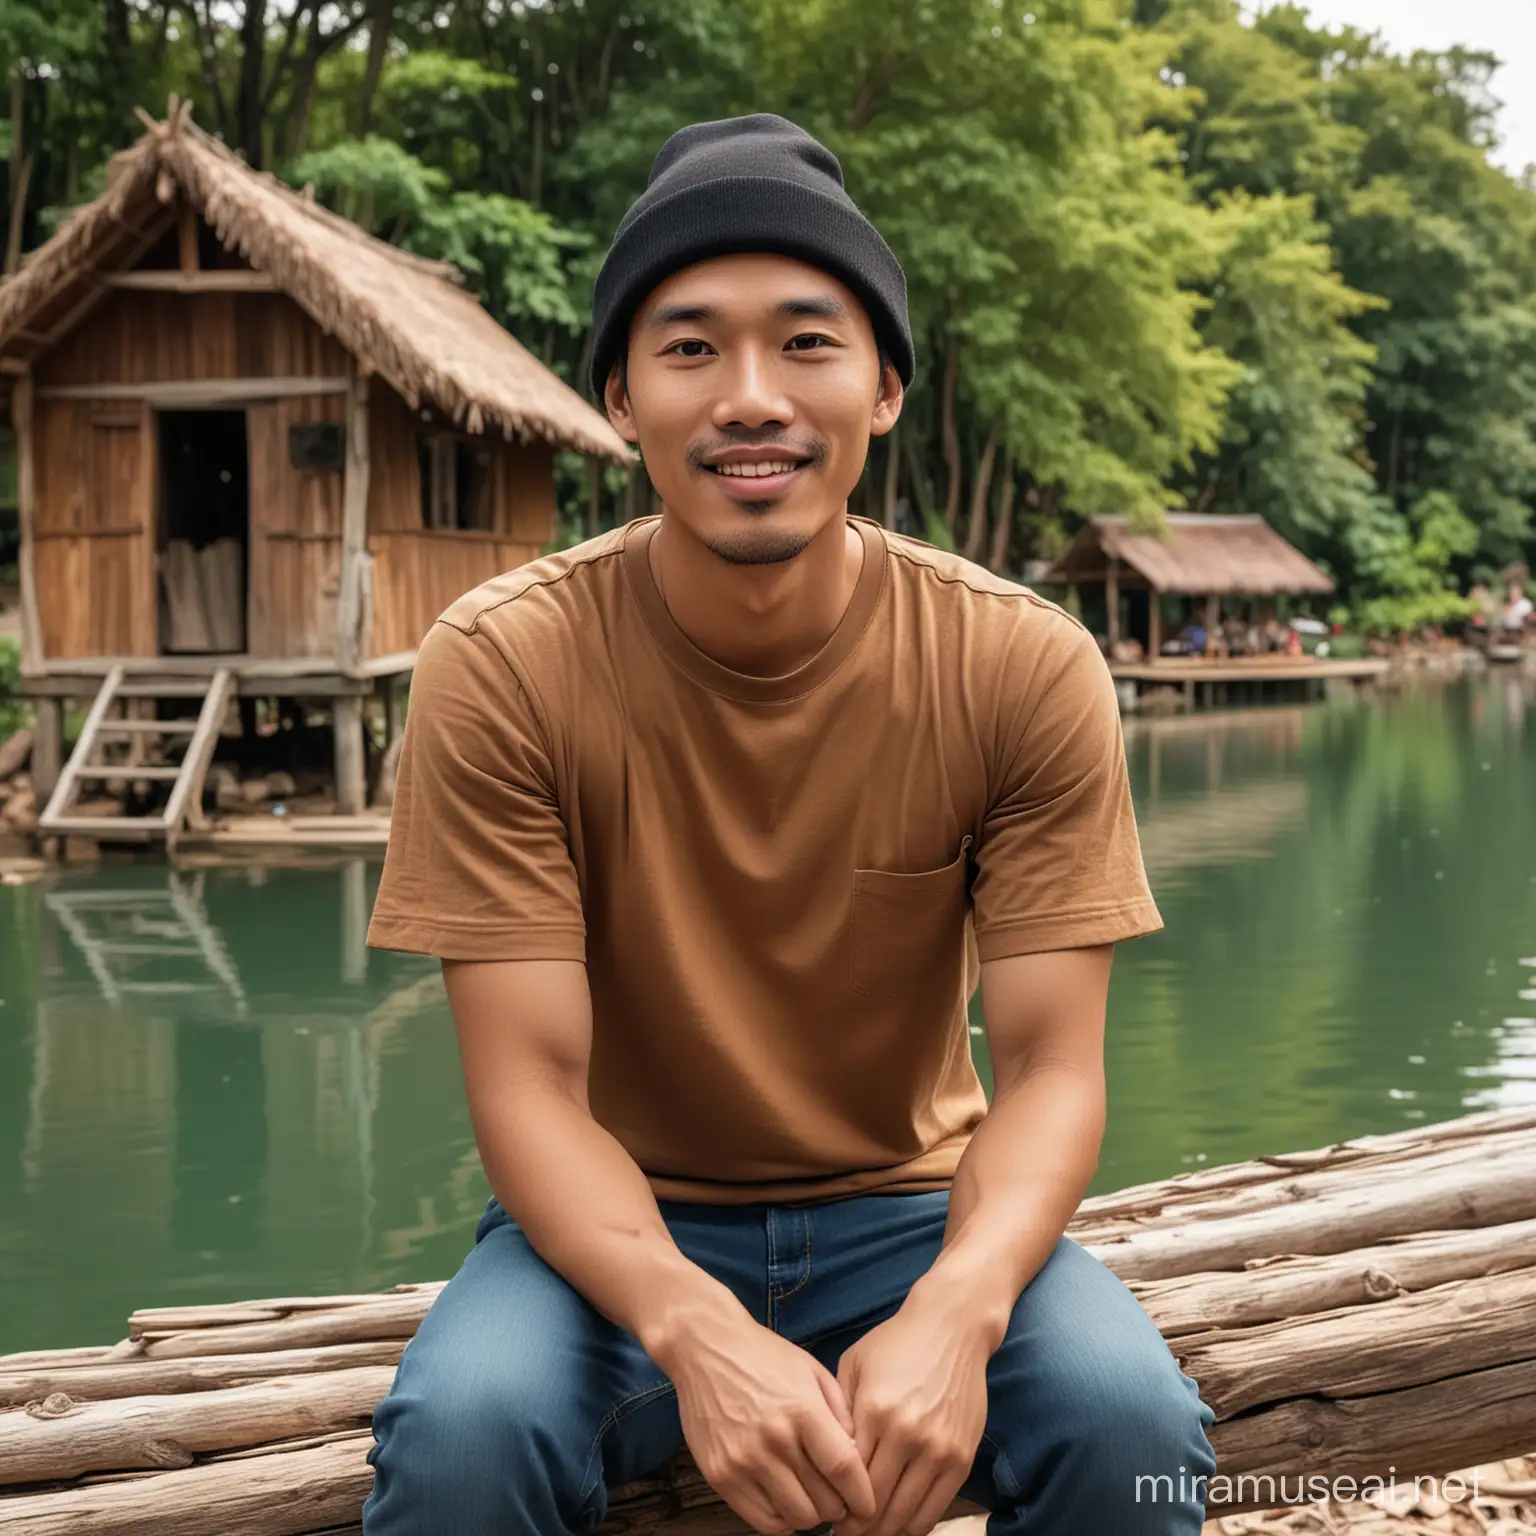 Friendly Asian Man in LeafRoofed Hut with Colorful Sampans on Lake